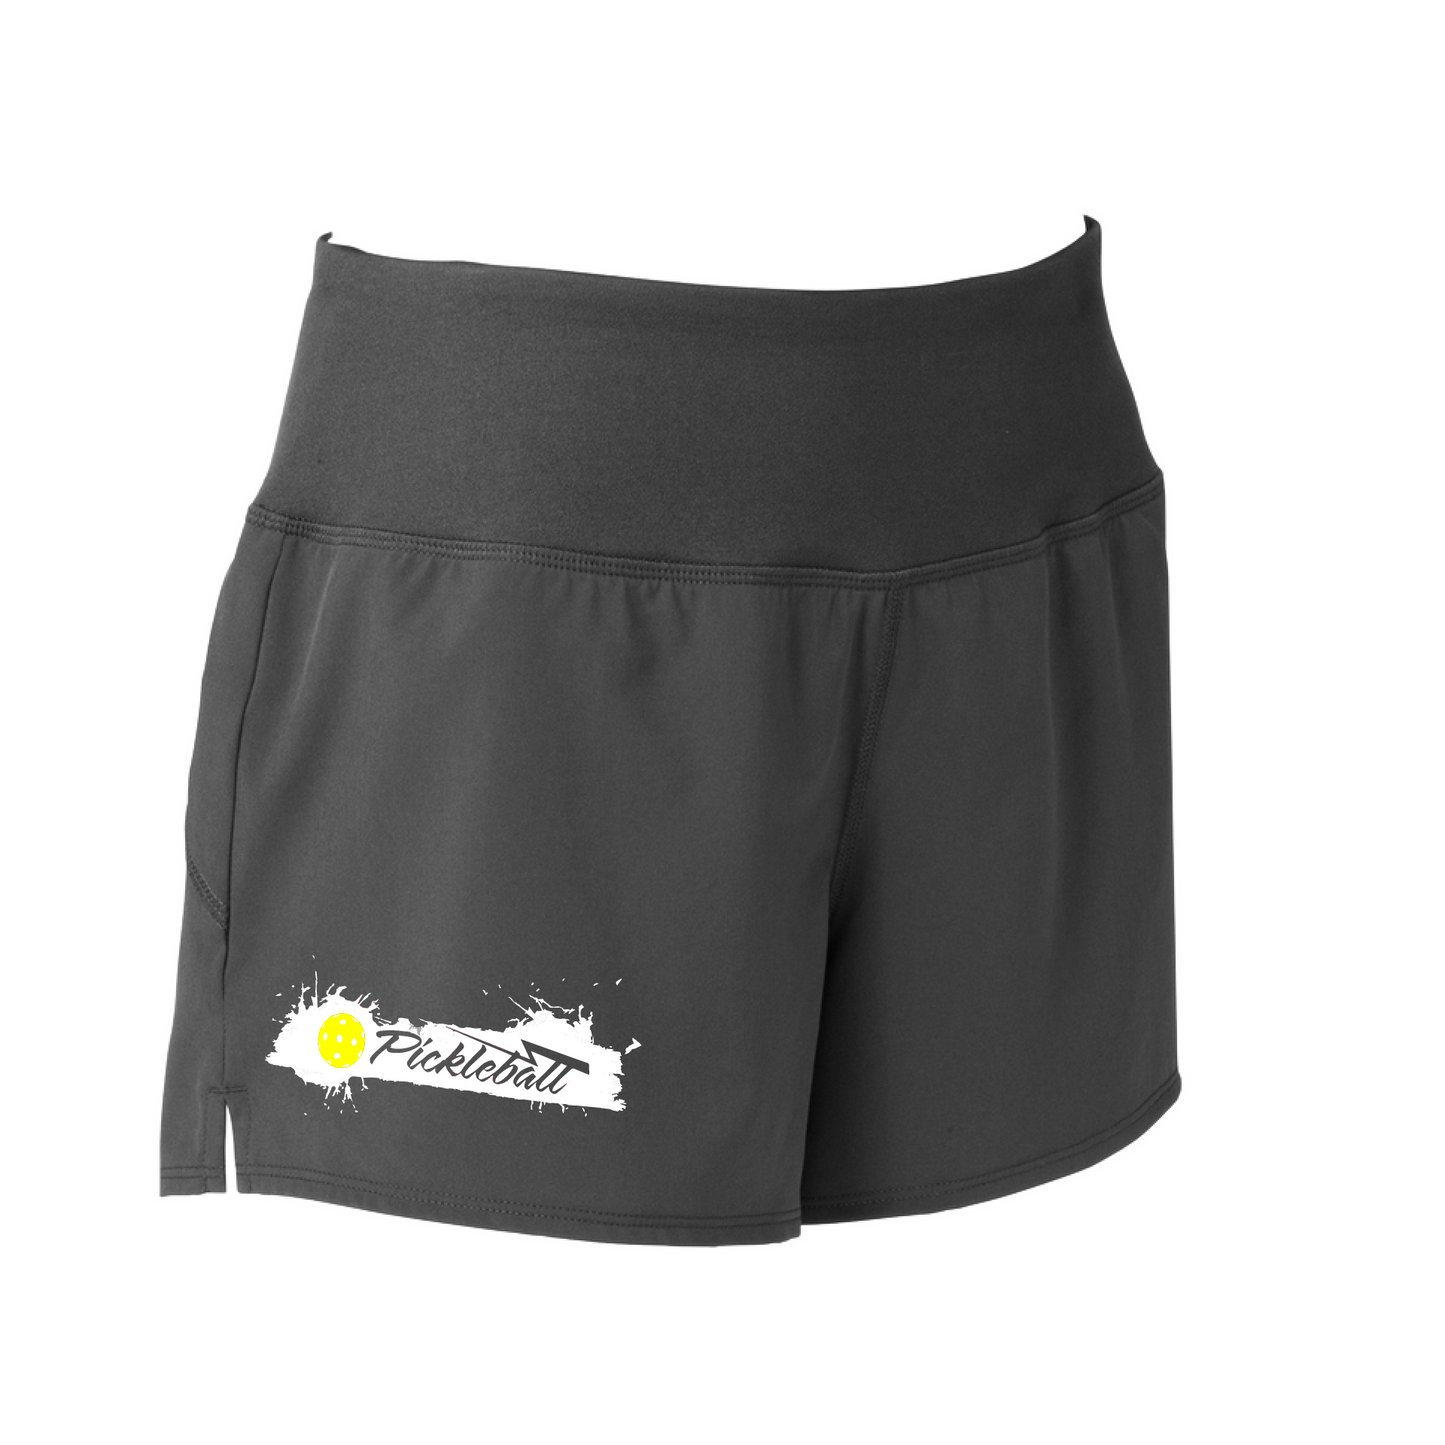 Pickleball Designs: Extreme Pickleball  Sport Tek women’s repeat shorts come with built-in cell phone pocket on the exterior of the waistband. You can also feel secure knowing that no matter how strenuous the exercise, the shorts will remain in place (it won’t ride up!). These shorts are extremely versatile and trendy. Transition from the Pickleball court to running errands smoothly.